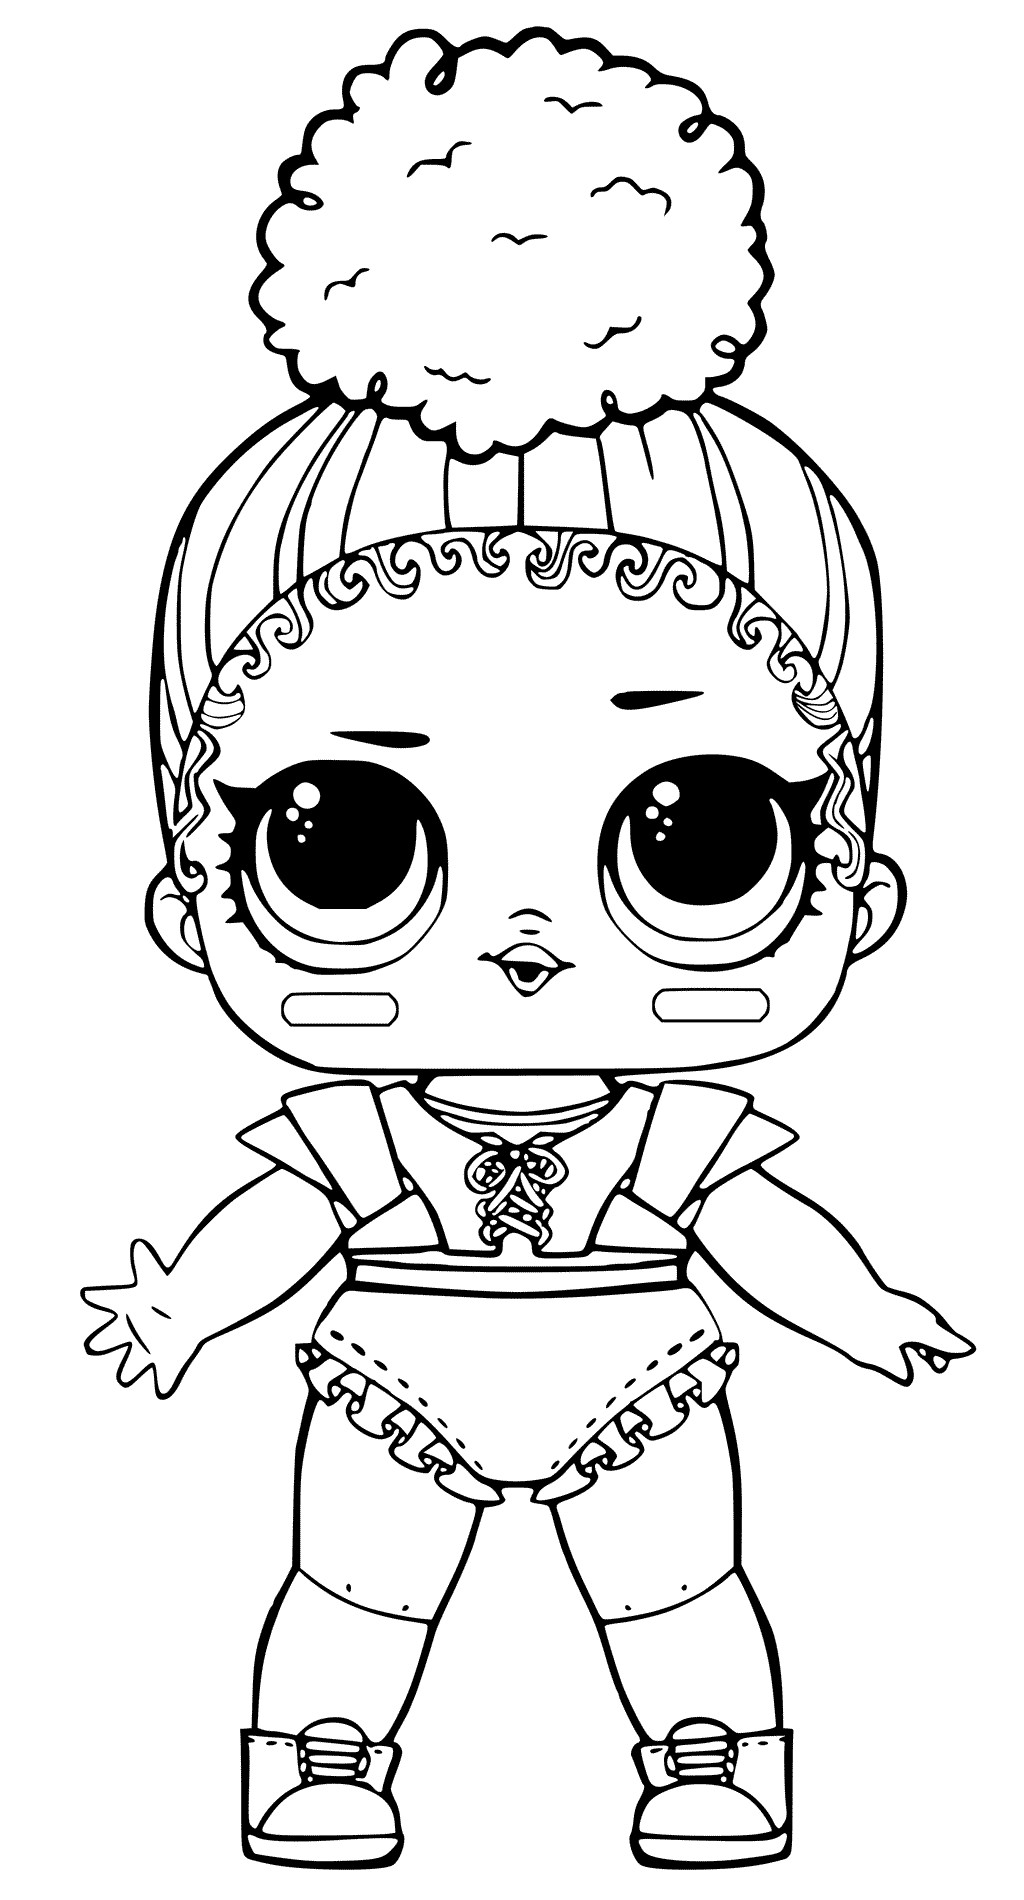 Coloring Pages For Kids Lol
 40 Free Printable LOL Surprise Dolls Coloring Pages